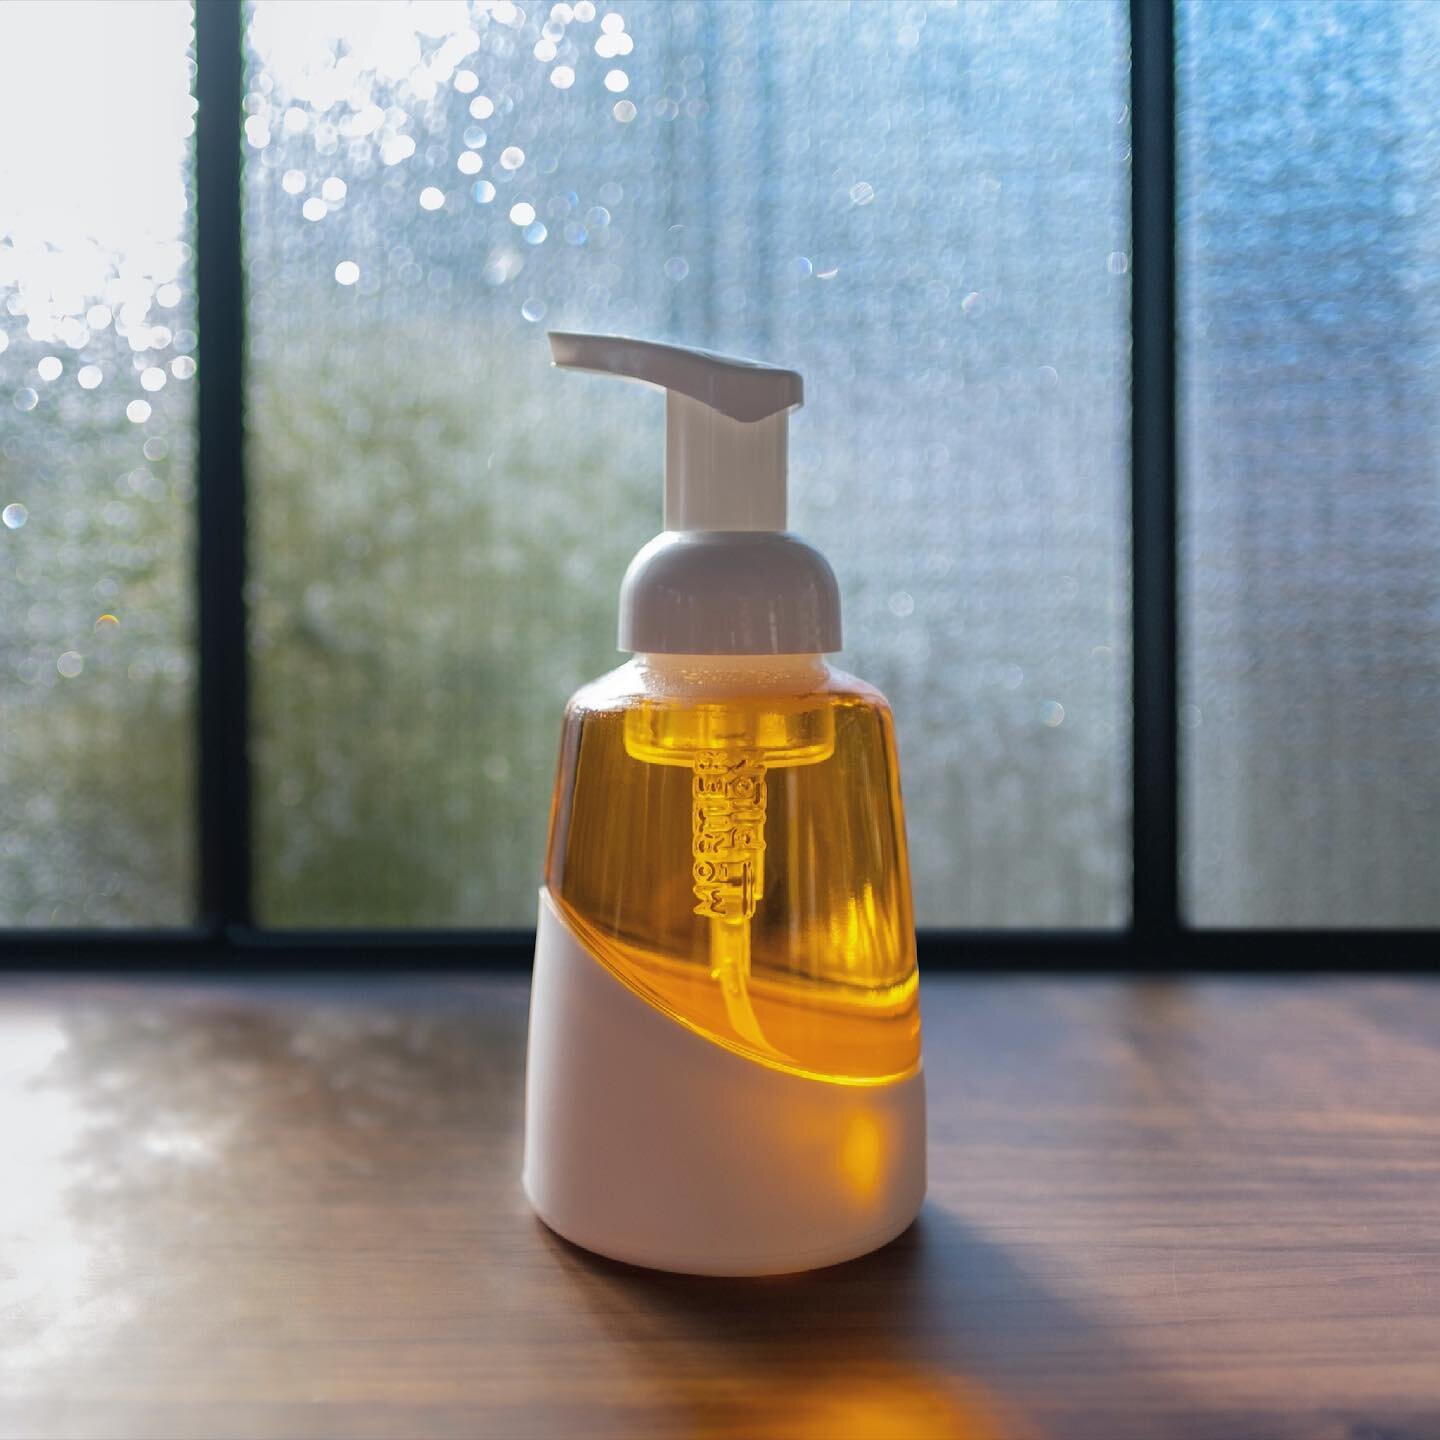 Reusable hand soap bottle, Mortier Pilon
&bull; Product design &bull; Product photography 
#productdesign #reusable #glassware #industrialdesign #productphotography